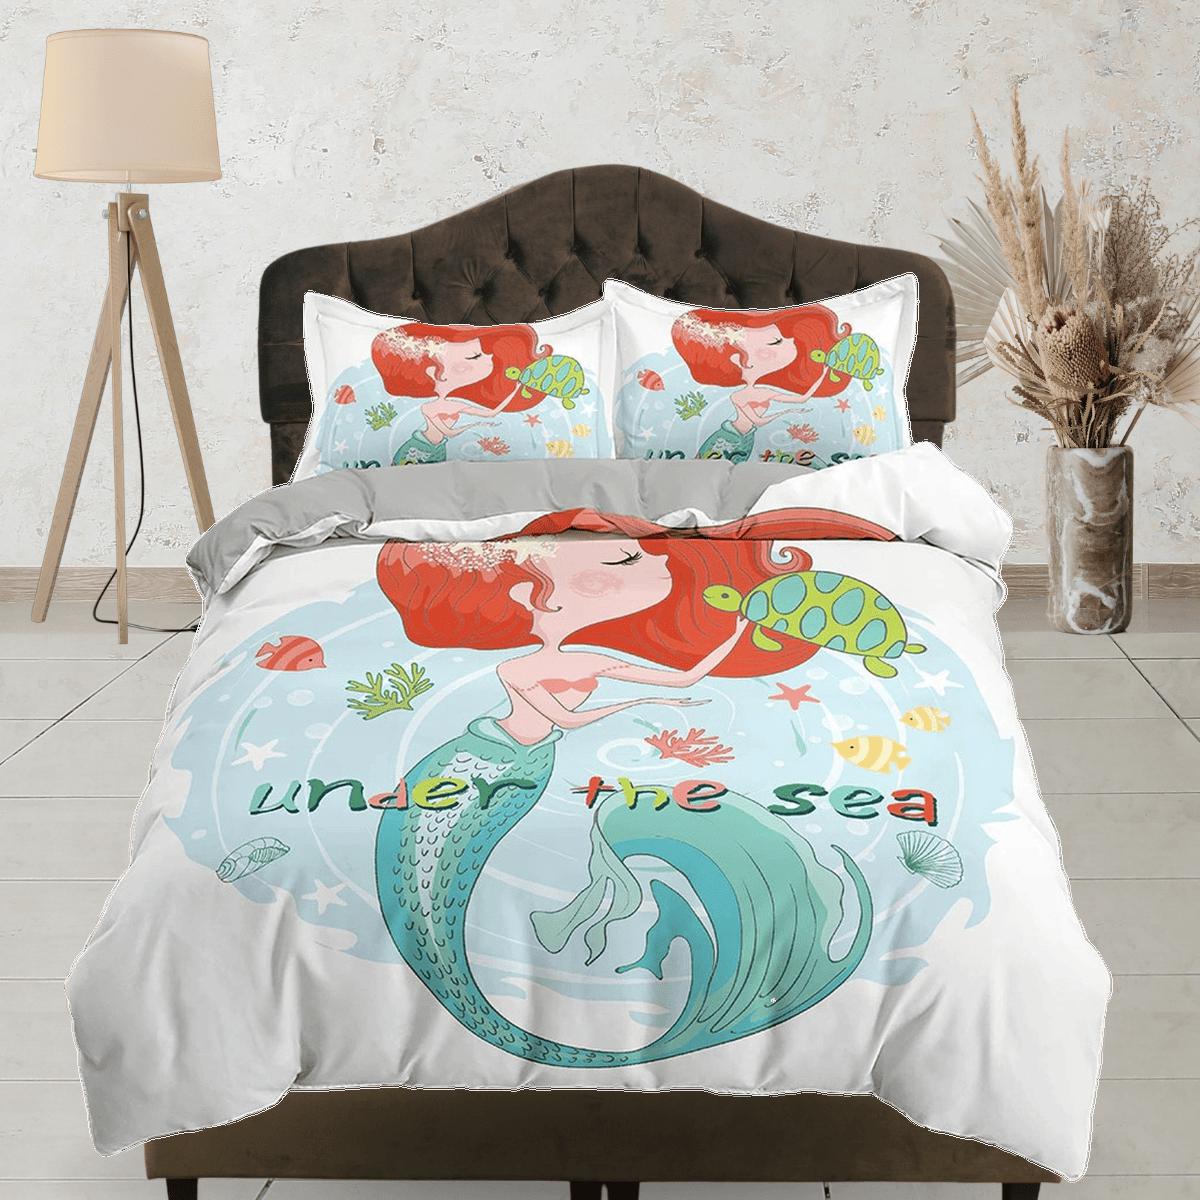 daintyduvet Little mermaid and turtle friend fairytale toddler bedding, unique duvet cover kids, crib bedding, baby zipper bedding, king queen full twin